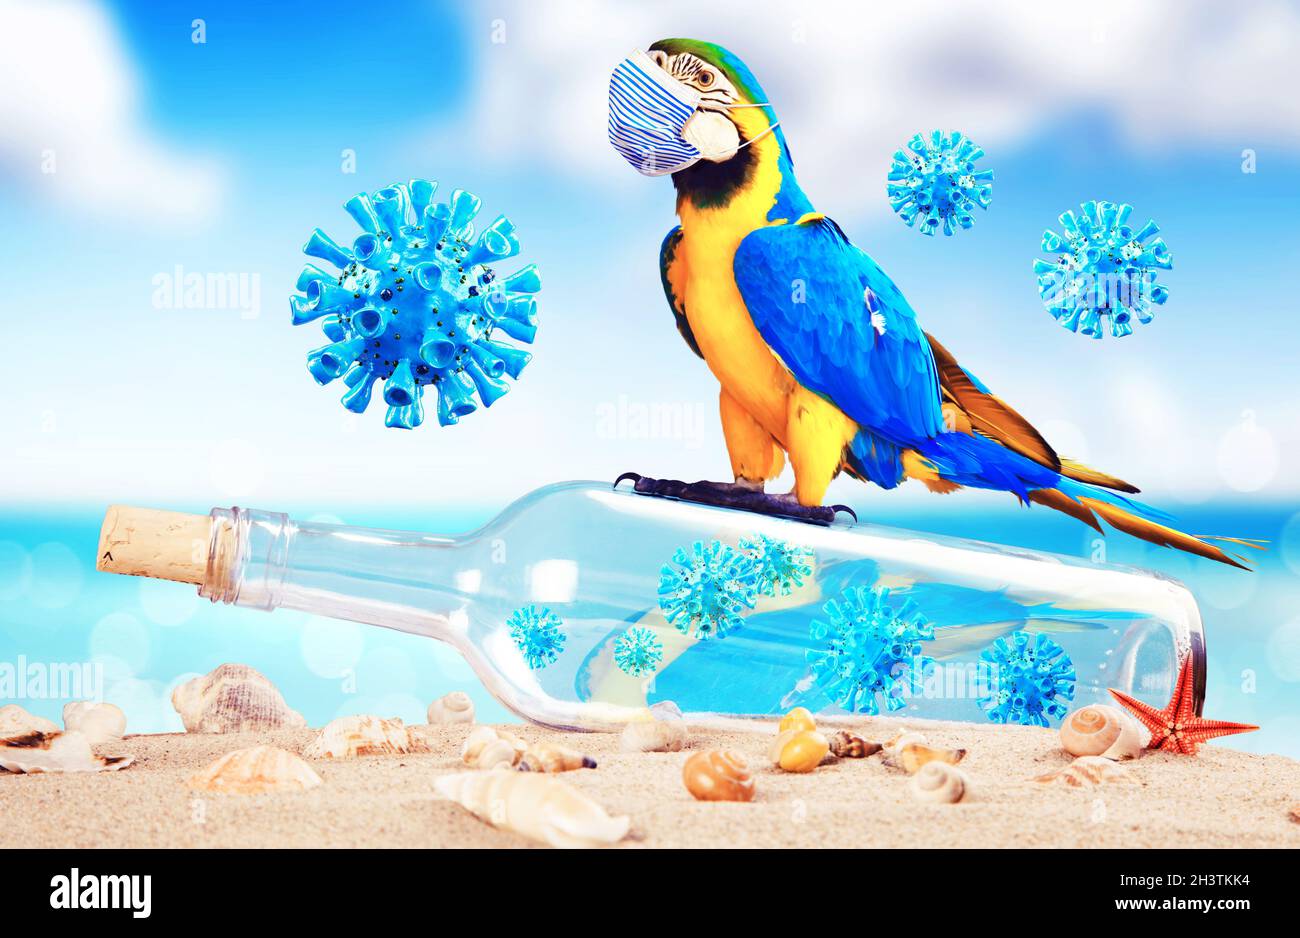 Message in a bottle with corona virus and parrot on vacation Stock Photo